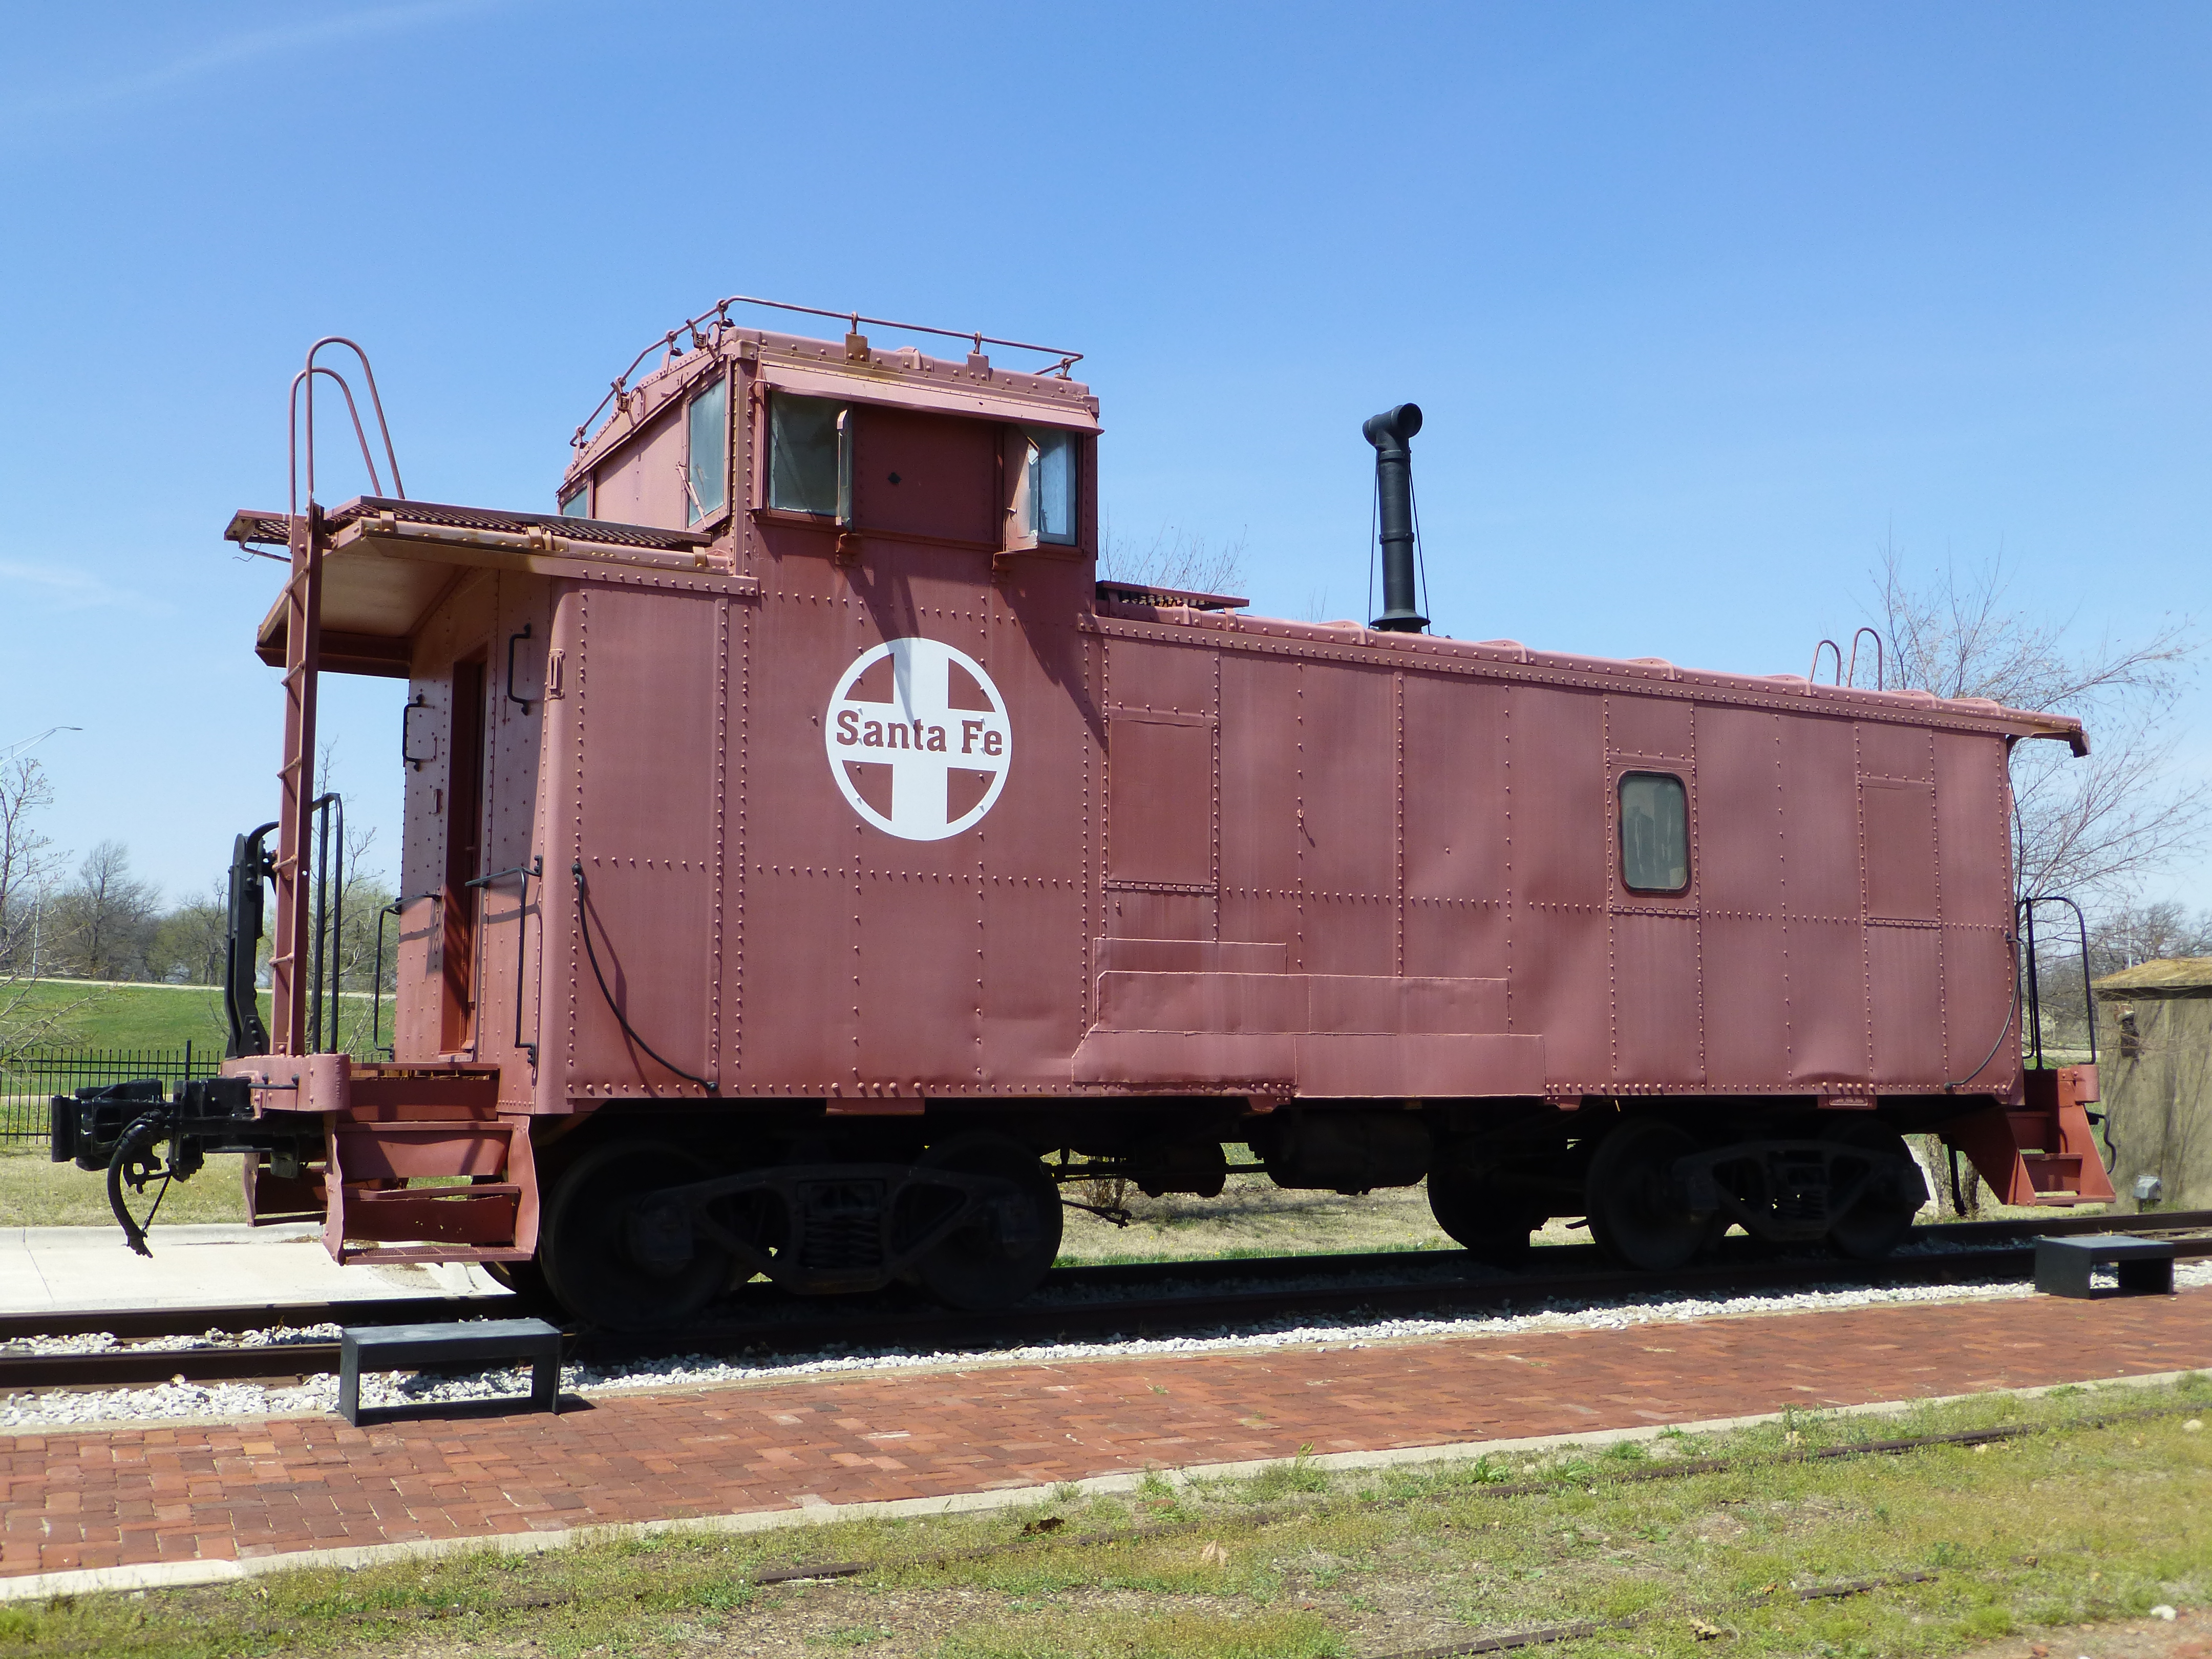 The 1940s caboose was donated to the Franklin County Historical Society in 2012.